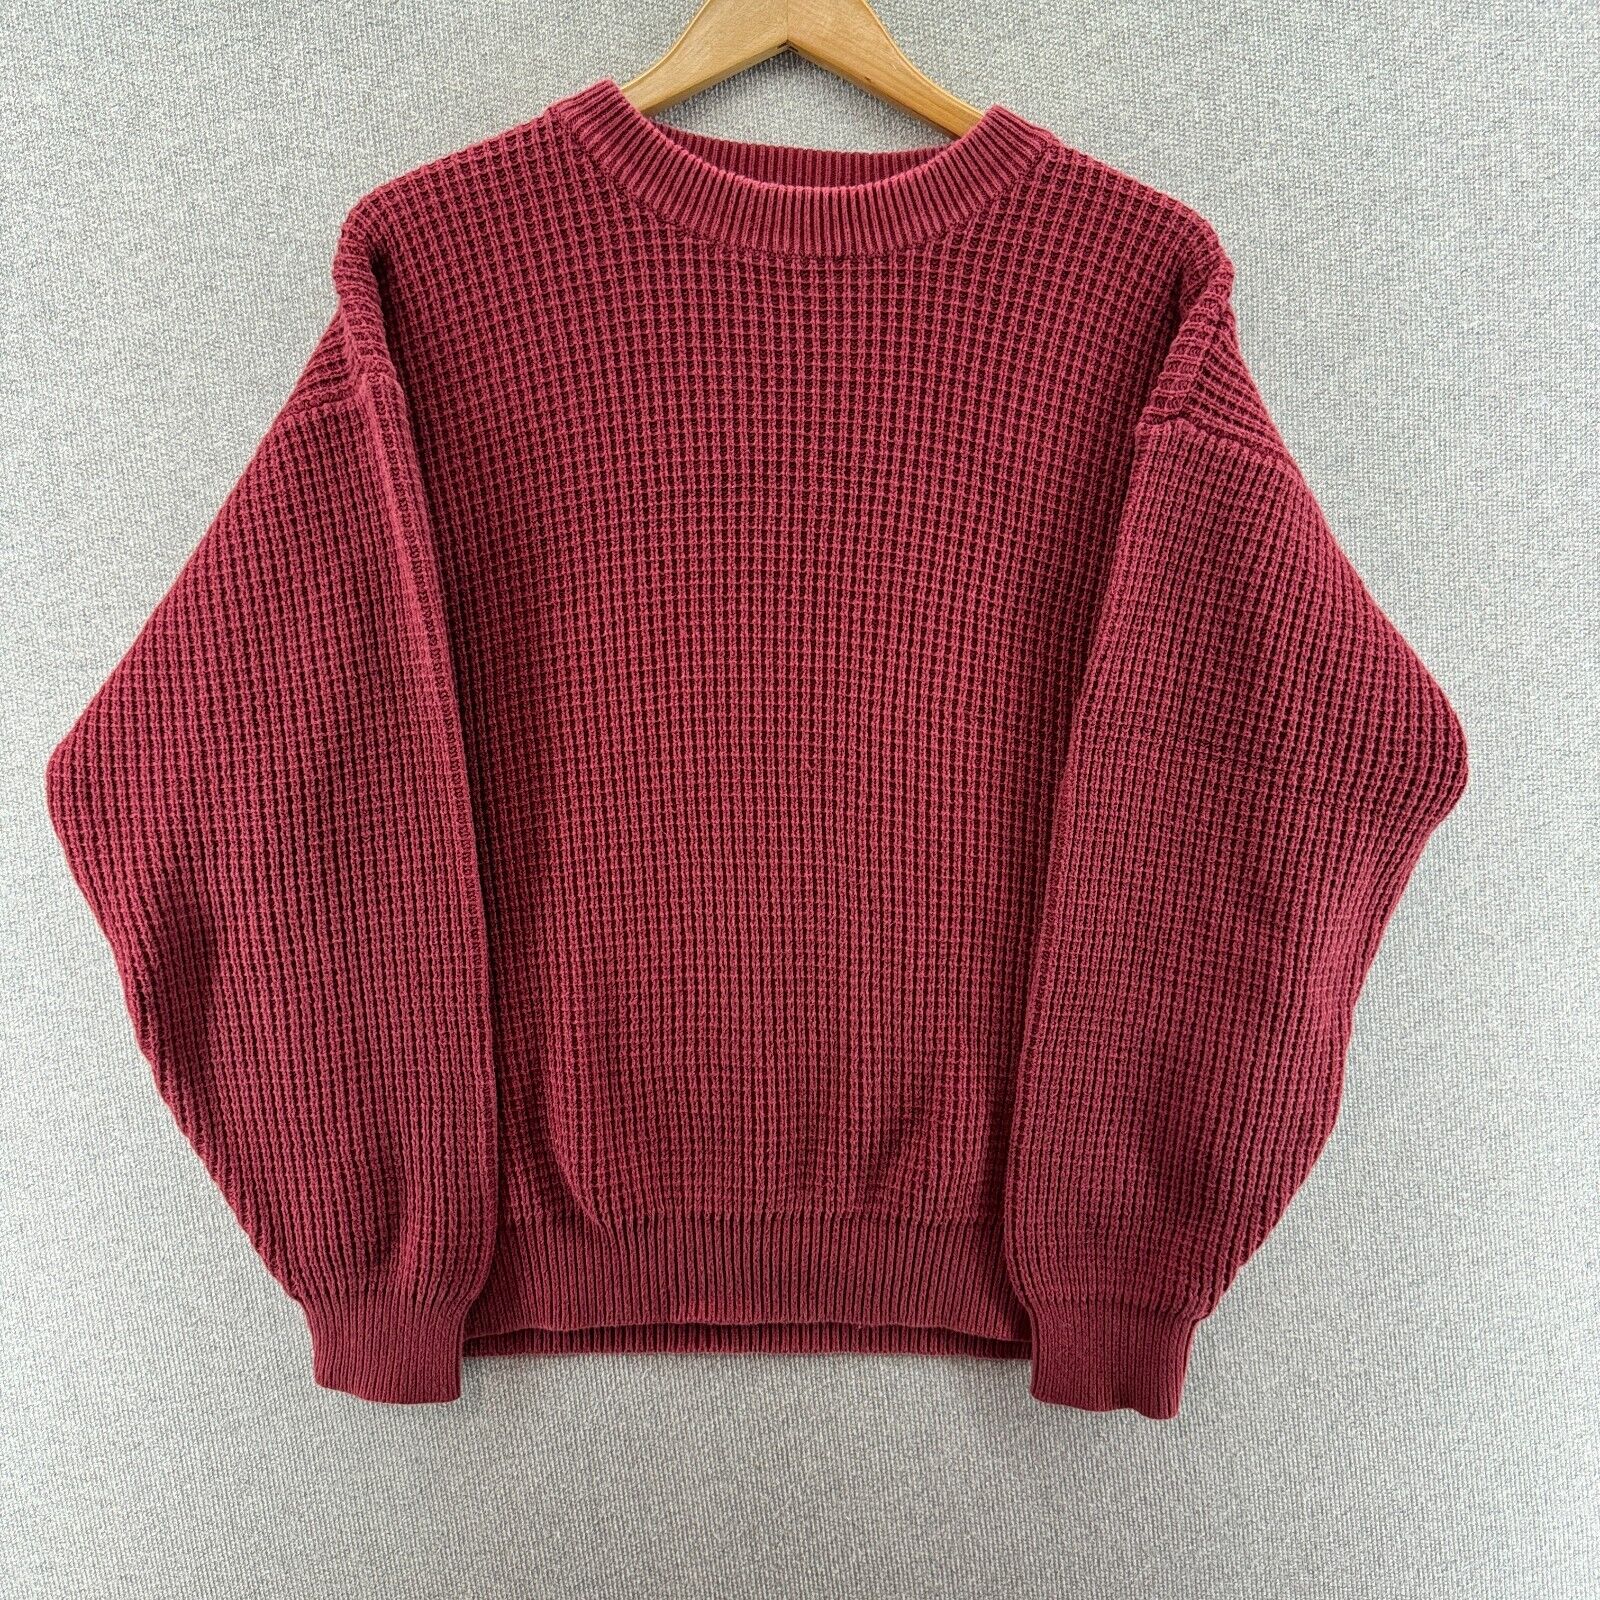 Vintage L.L. Bean Mens Sweater Red Large Waffle Knit Grid Heavyweight Cotton